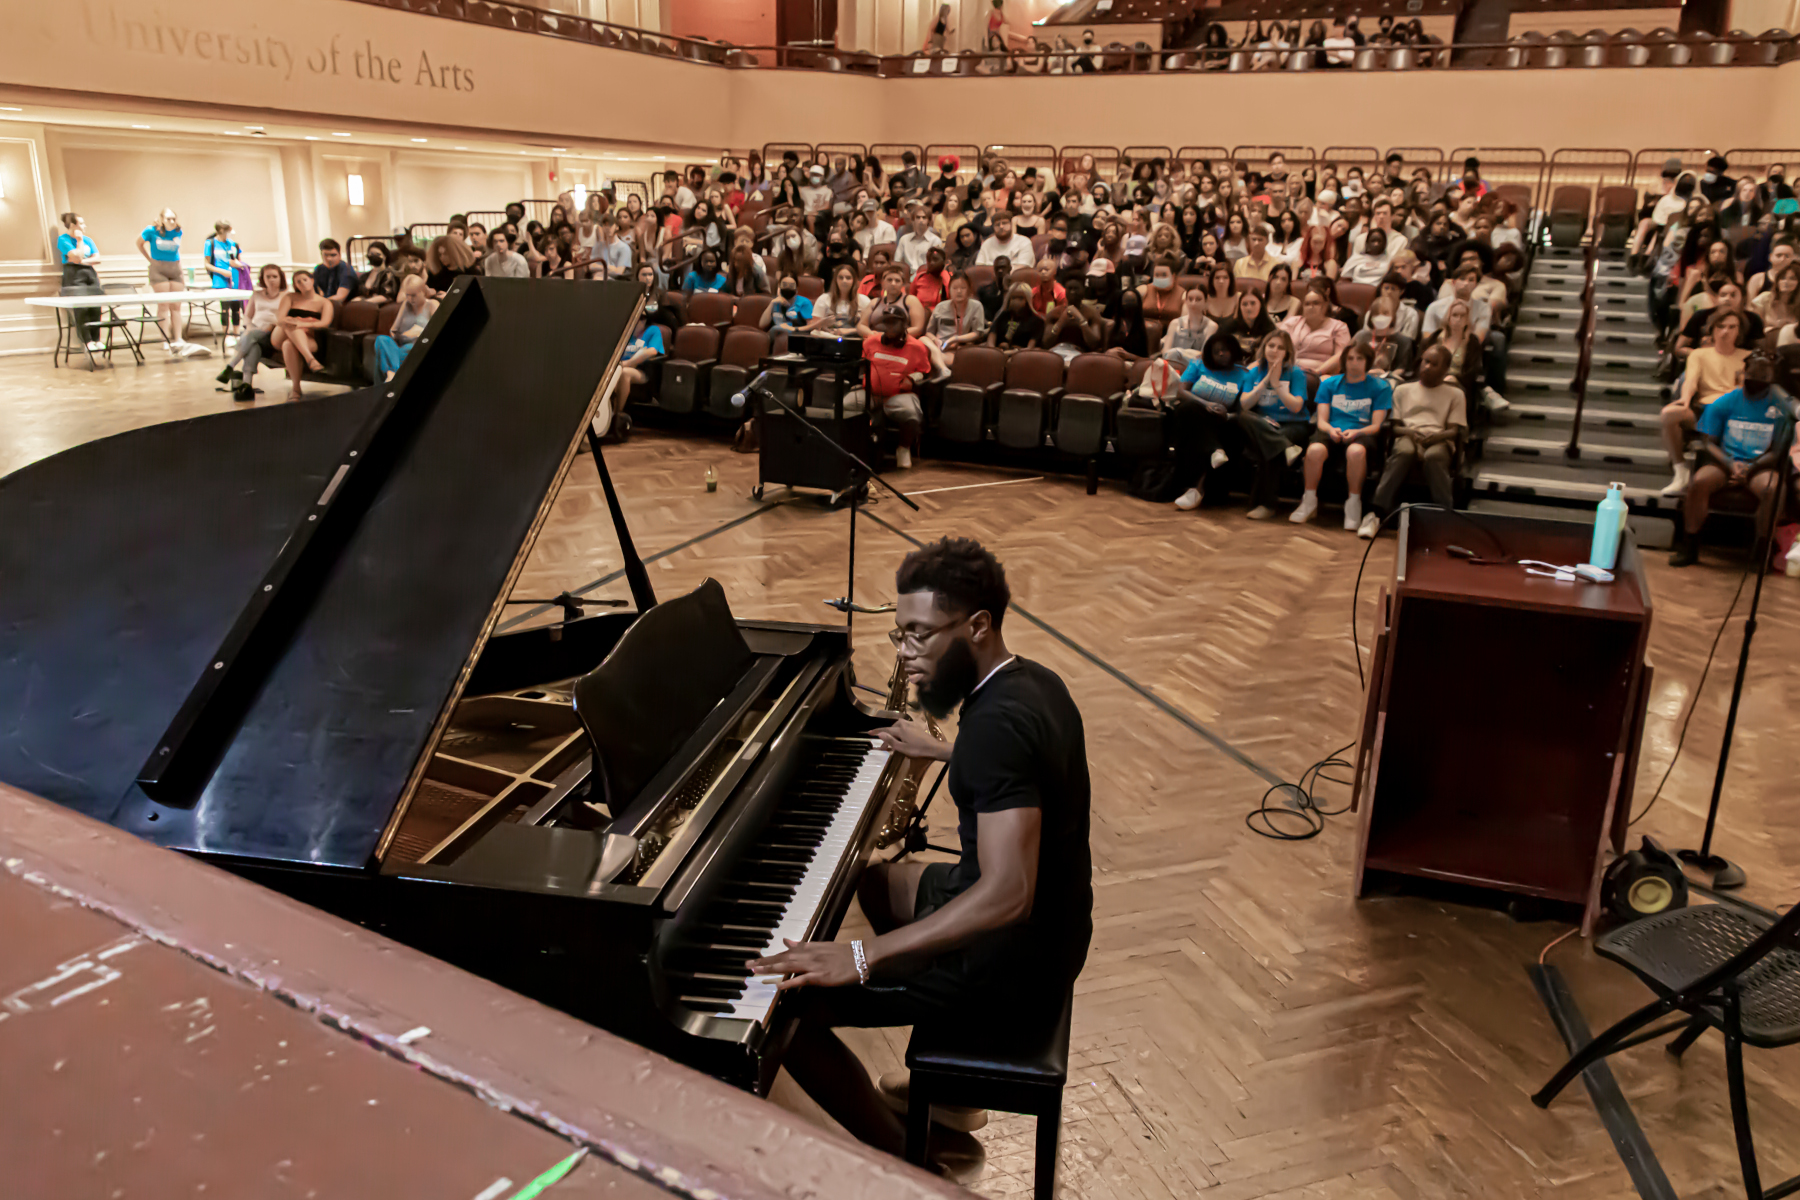 interior of levitt recital hall, seen from the stage. near the viewer is a grand piano with a person in a black t shirt and black glasses playing, seen in profile. the floor is a wooden chevron pattern. the raked seating area is packed with people. the seating area is ringed with a second floor balcony seating area